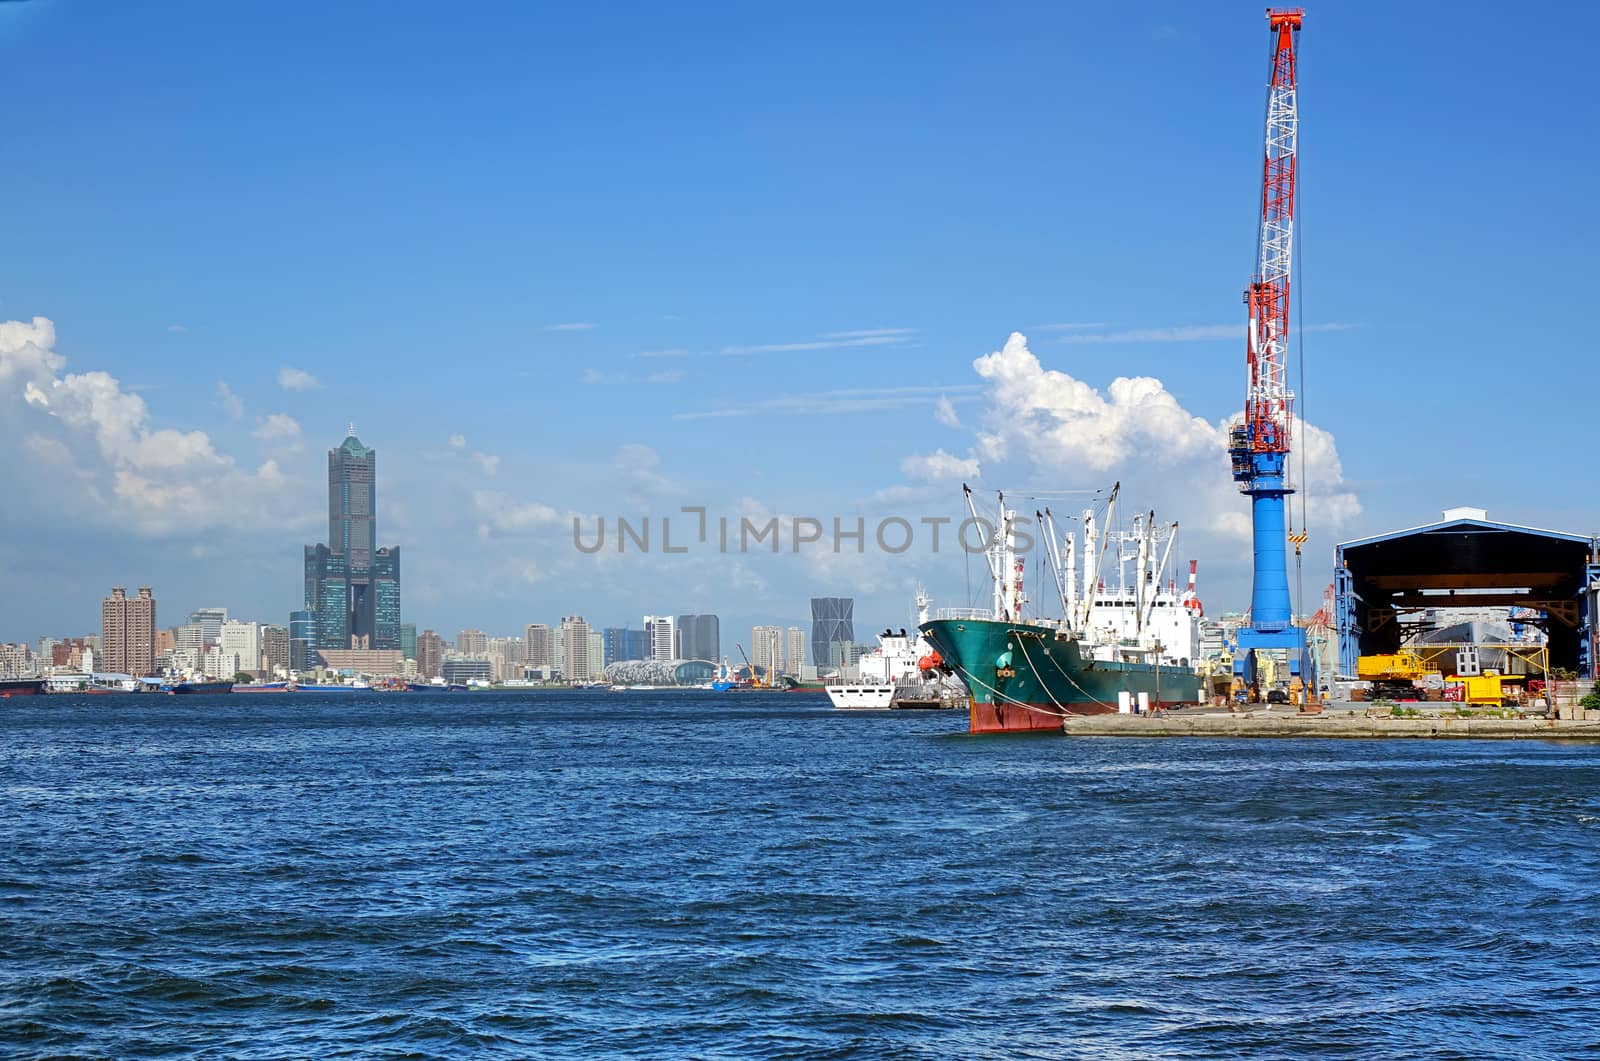 The skyline of Kaohsiung City in Taiwan seen from the water